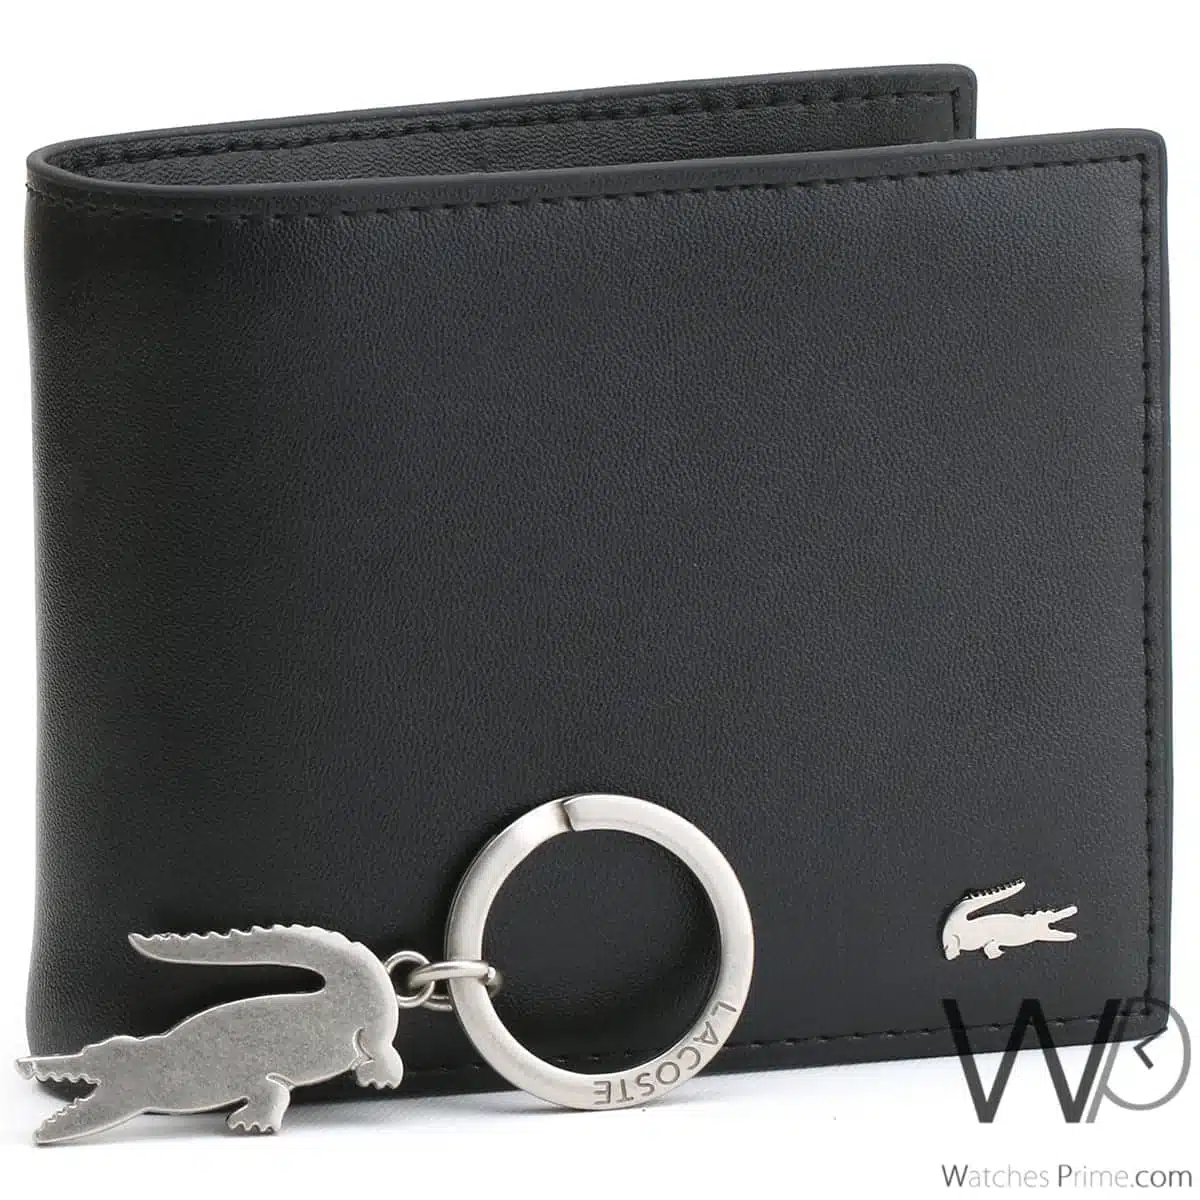 Lacoste wallet and keychain for men black | Watches Prime